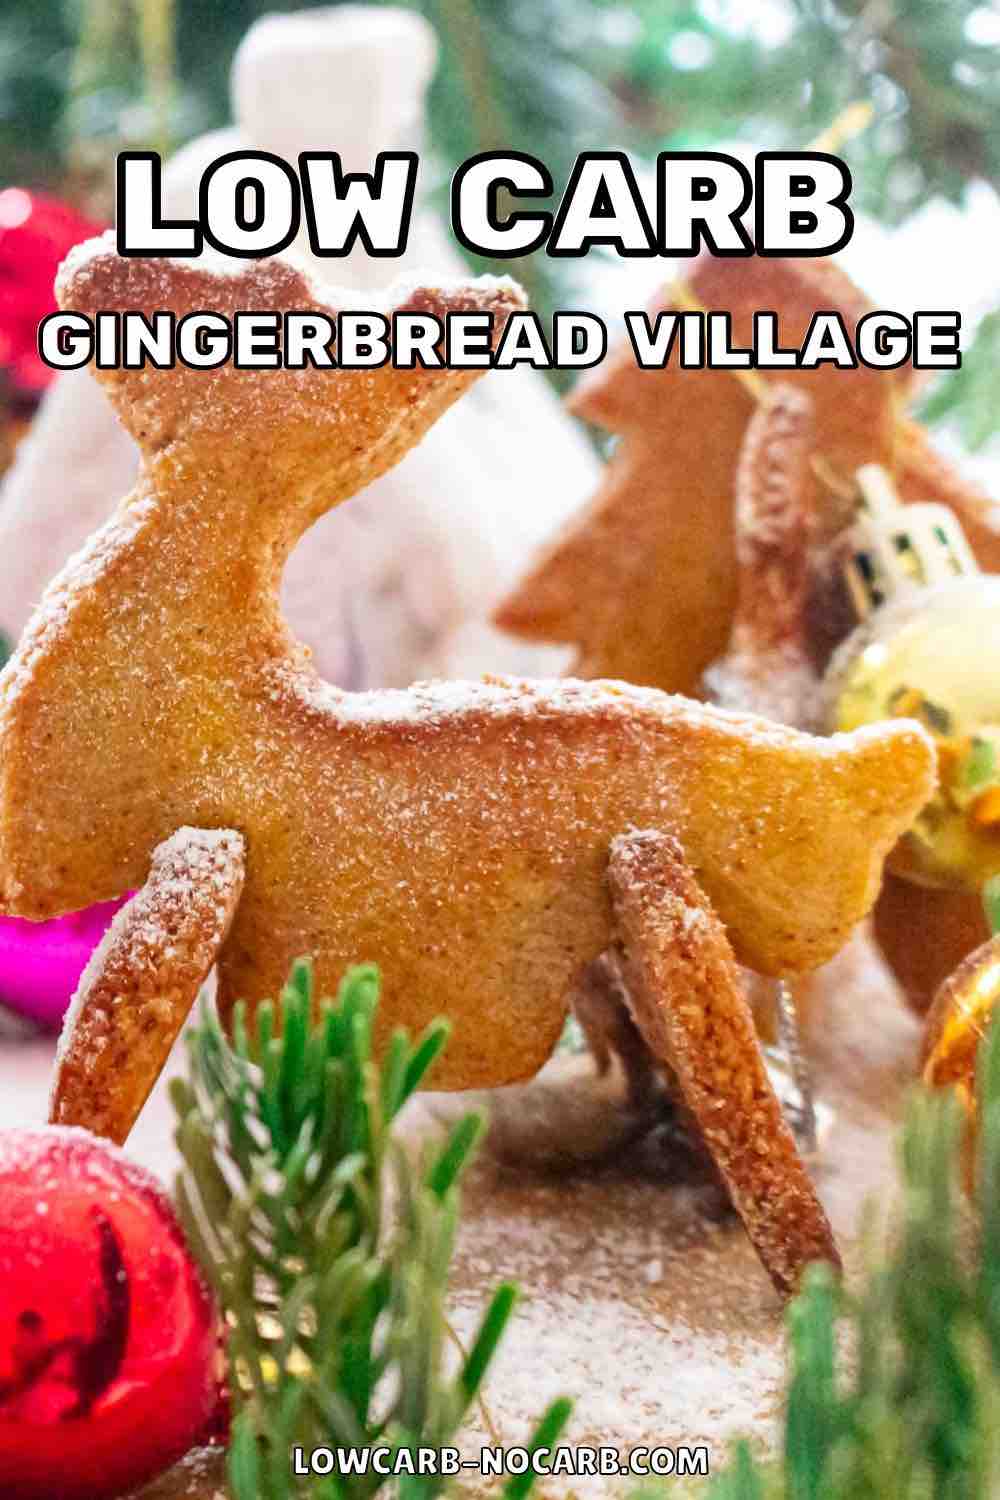 Sugar free gingerbread village set up as a table decoration.